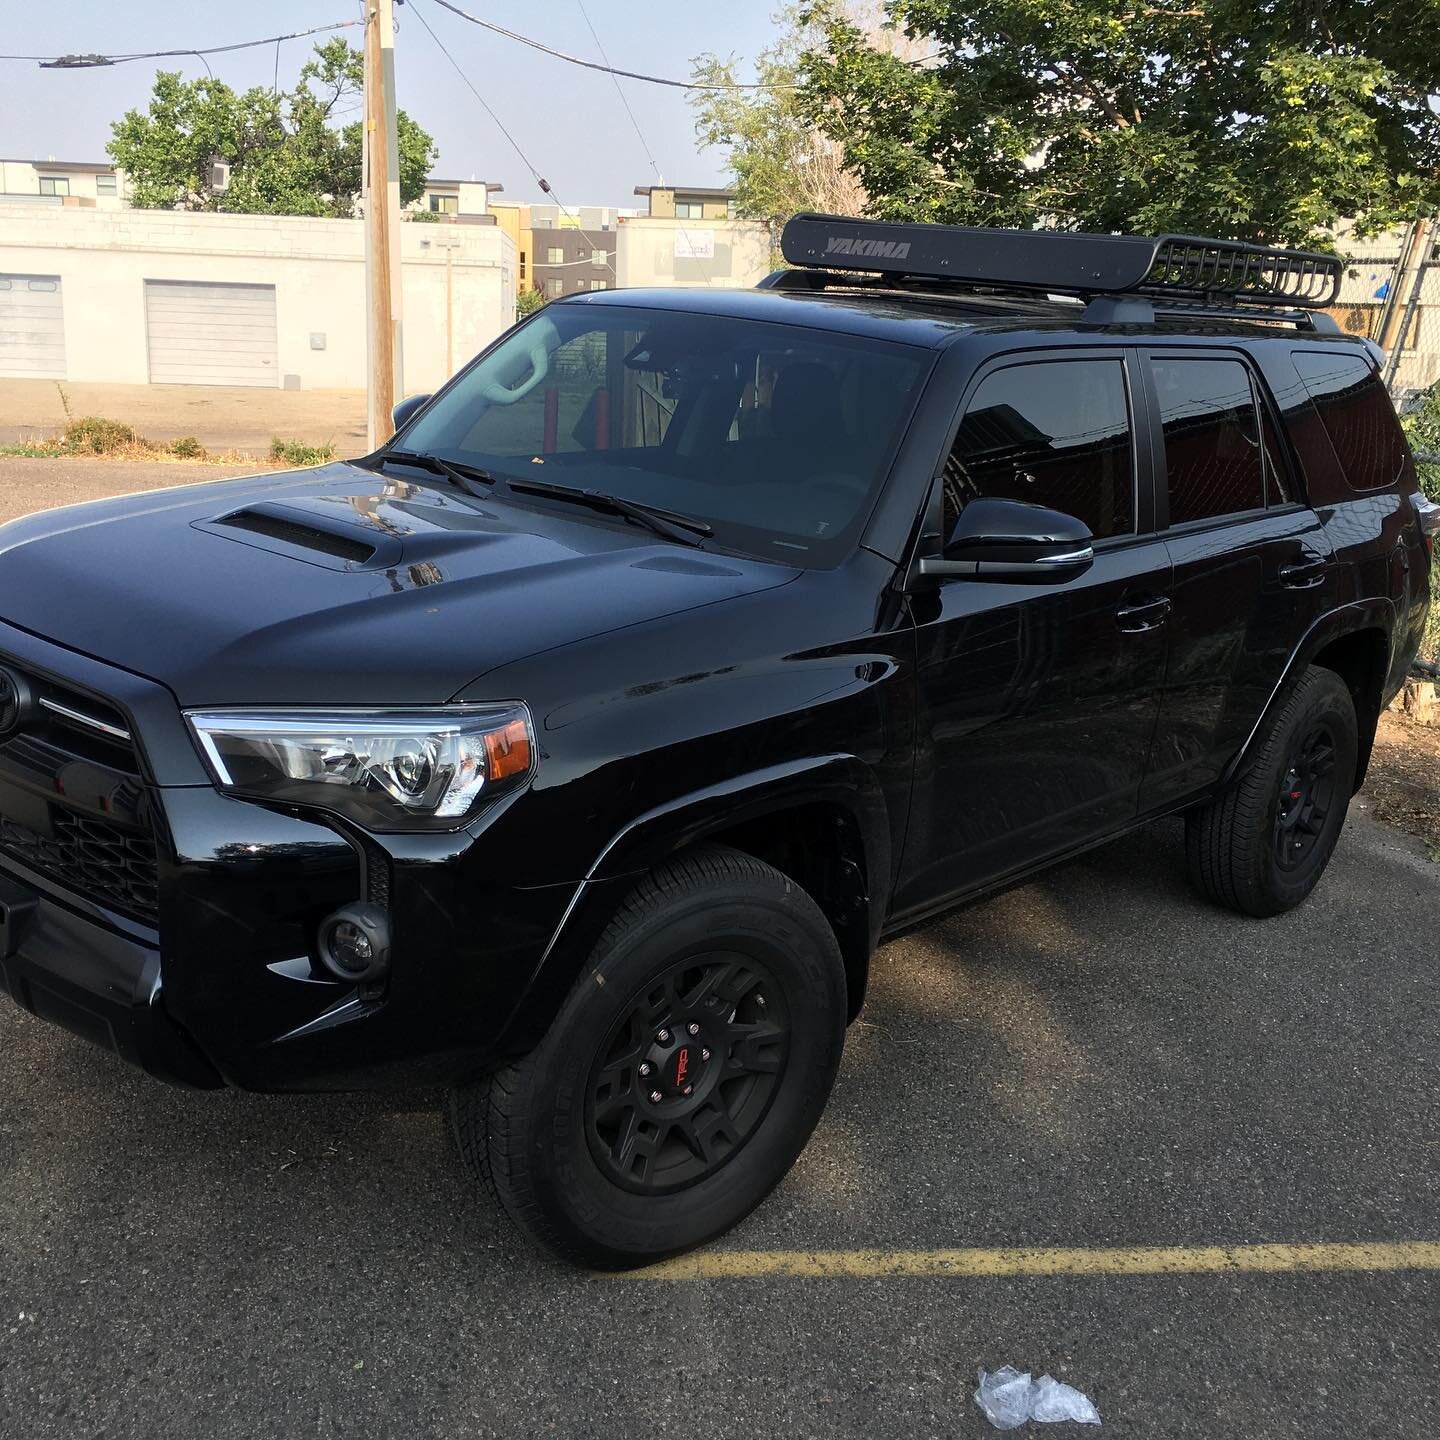 Another great day. Toyota 4Runner for ceramic on everything including windshield and sunroof, full tint on a Tesla model 3, starting a Lexus lx 570 for full vehicle ppf and full vehicle ceramic tint. Stay tuned.